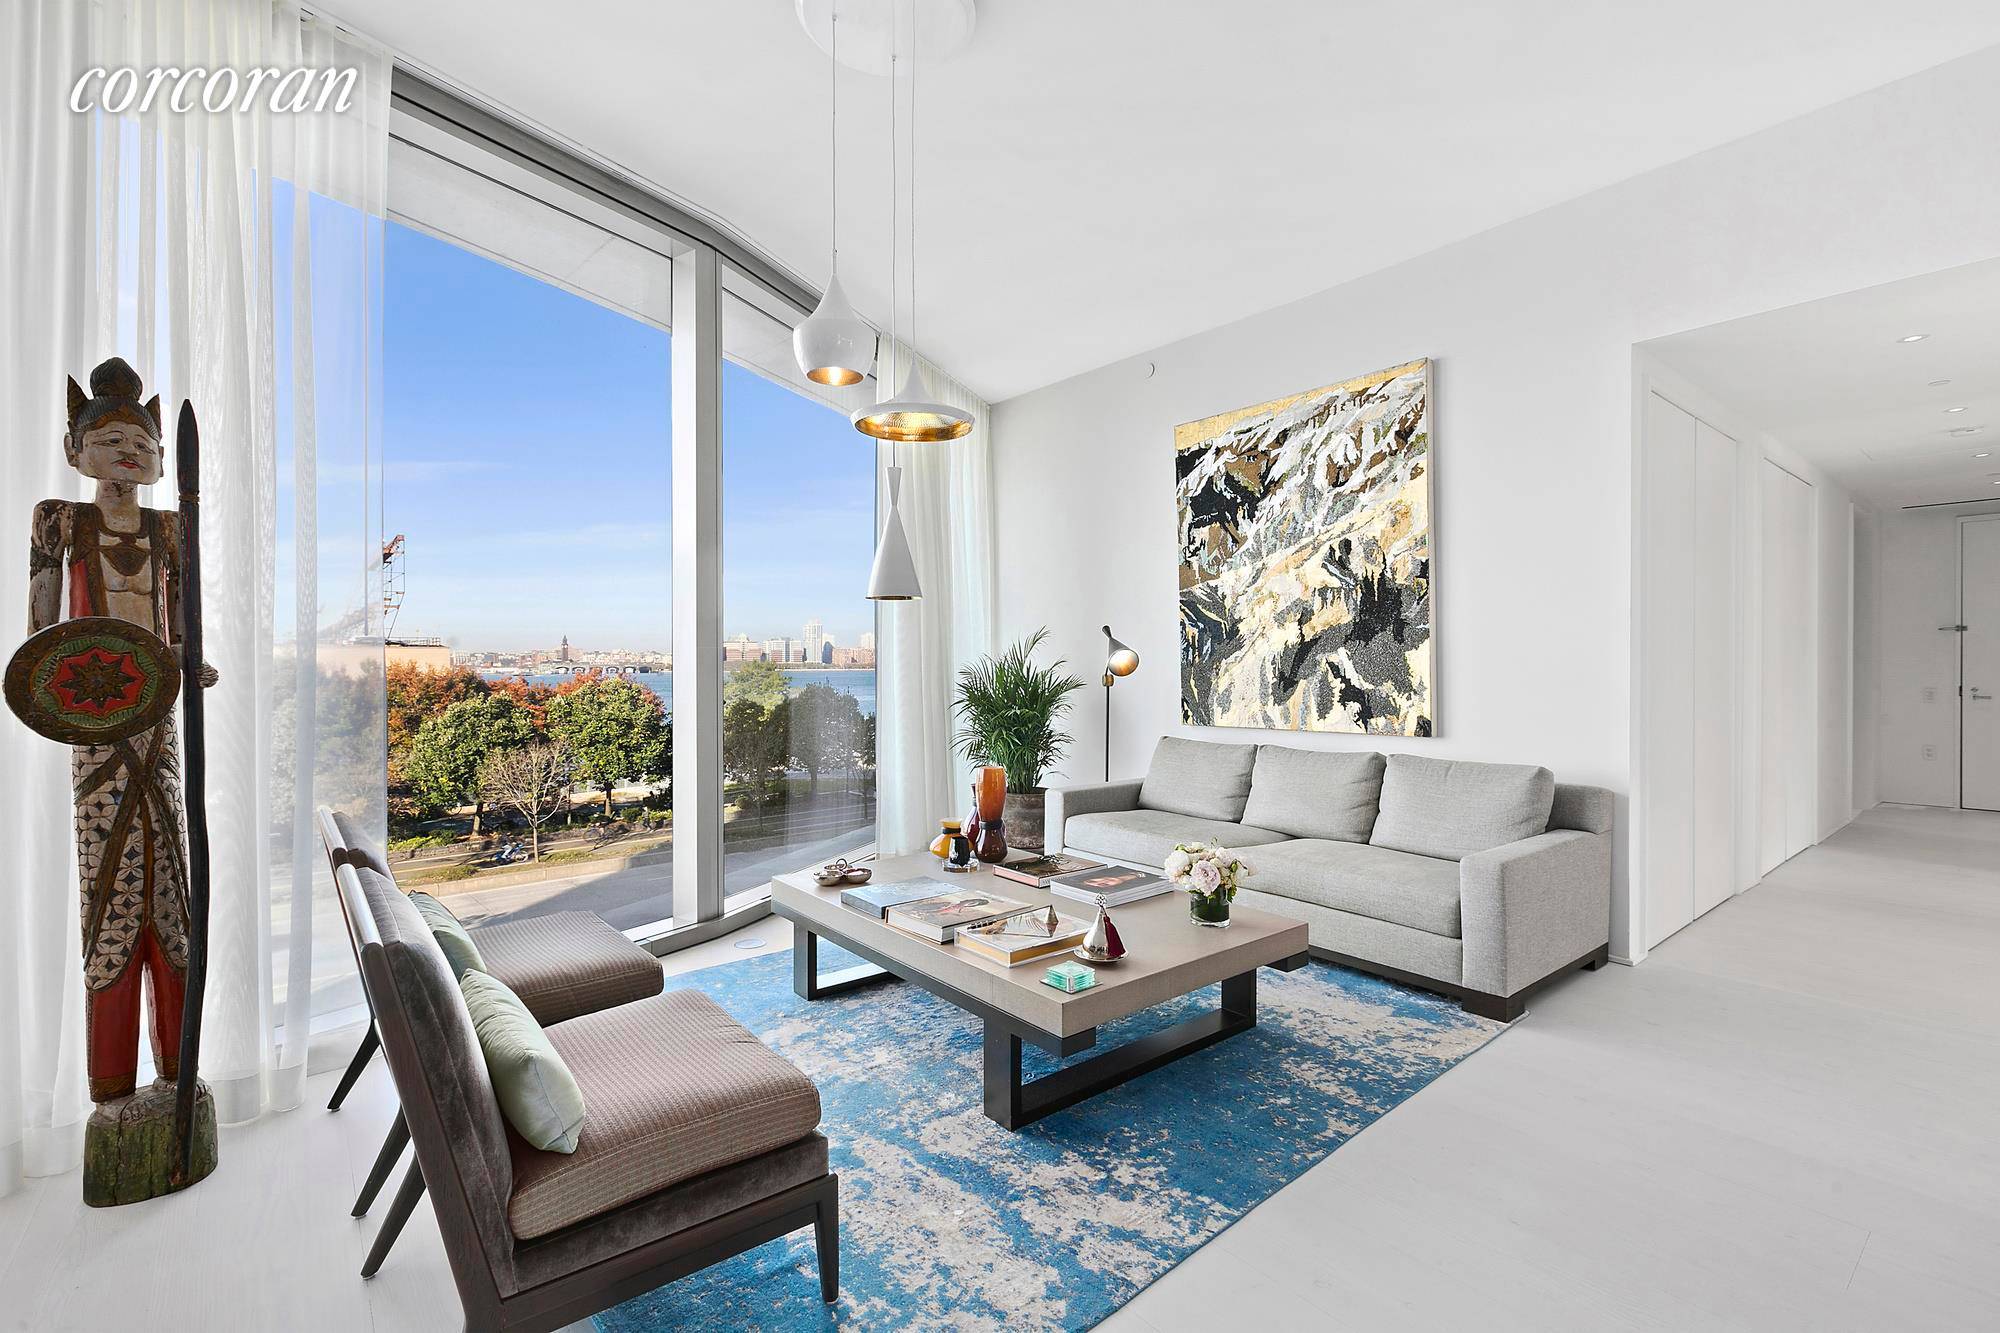 Situated along the West Village's Hudson River waterfront, this stunning home is one of a kind, inspired by a collaboration from renowned hotelier real estate developer, Ian Schrager, and designed ...